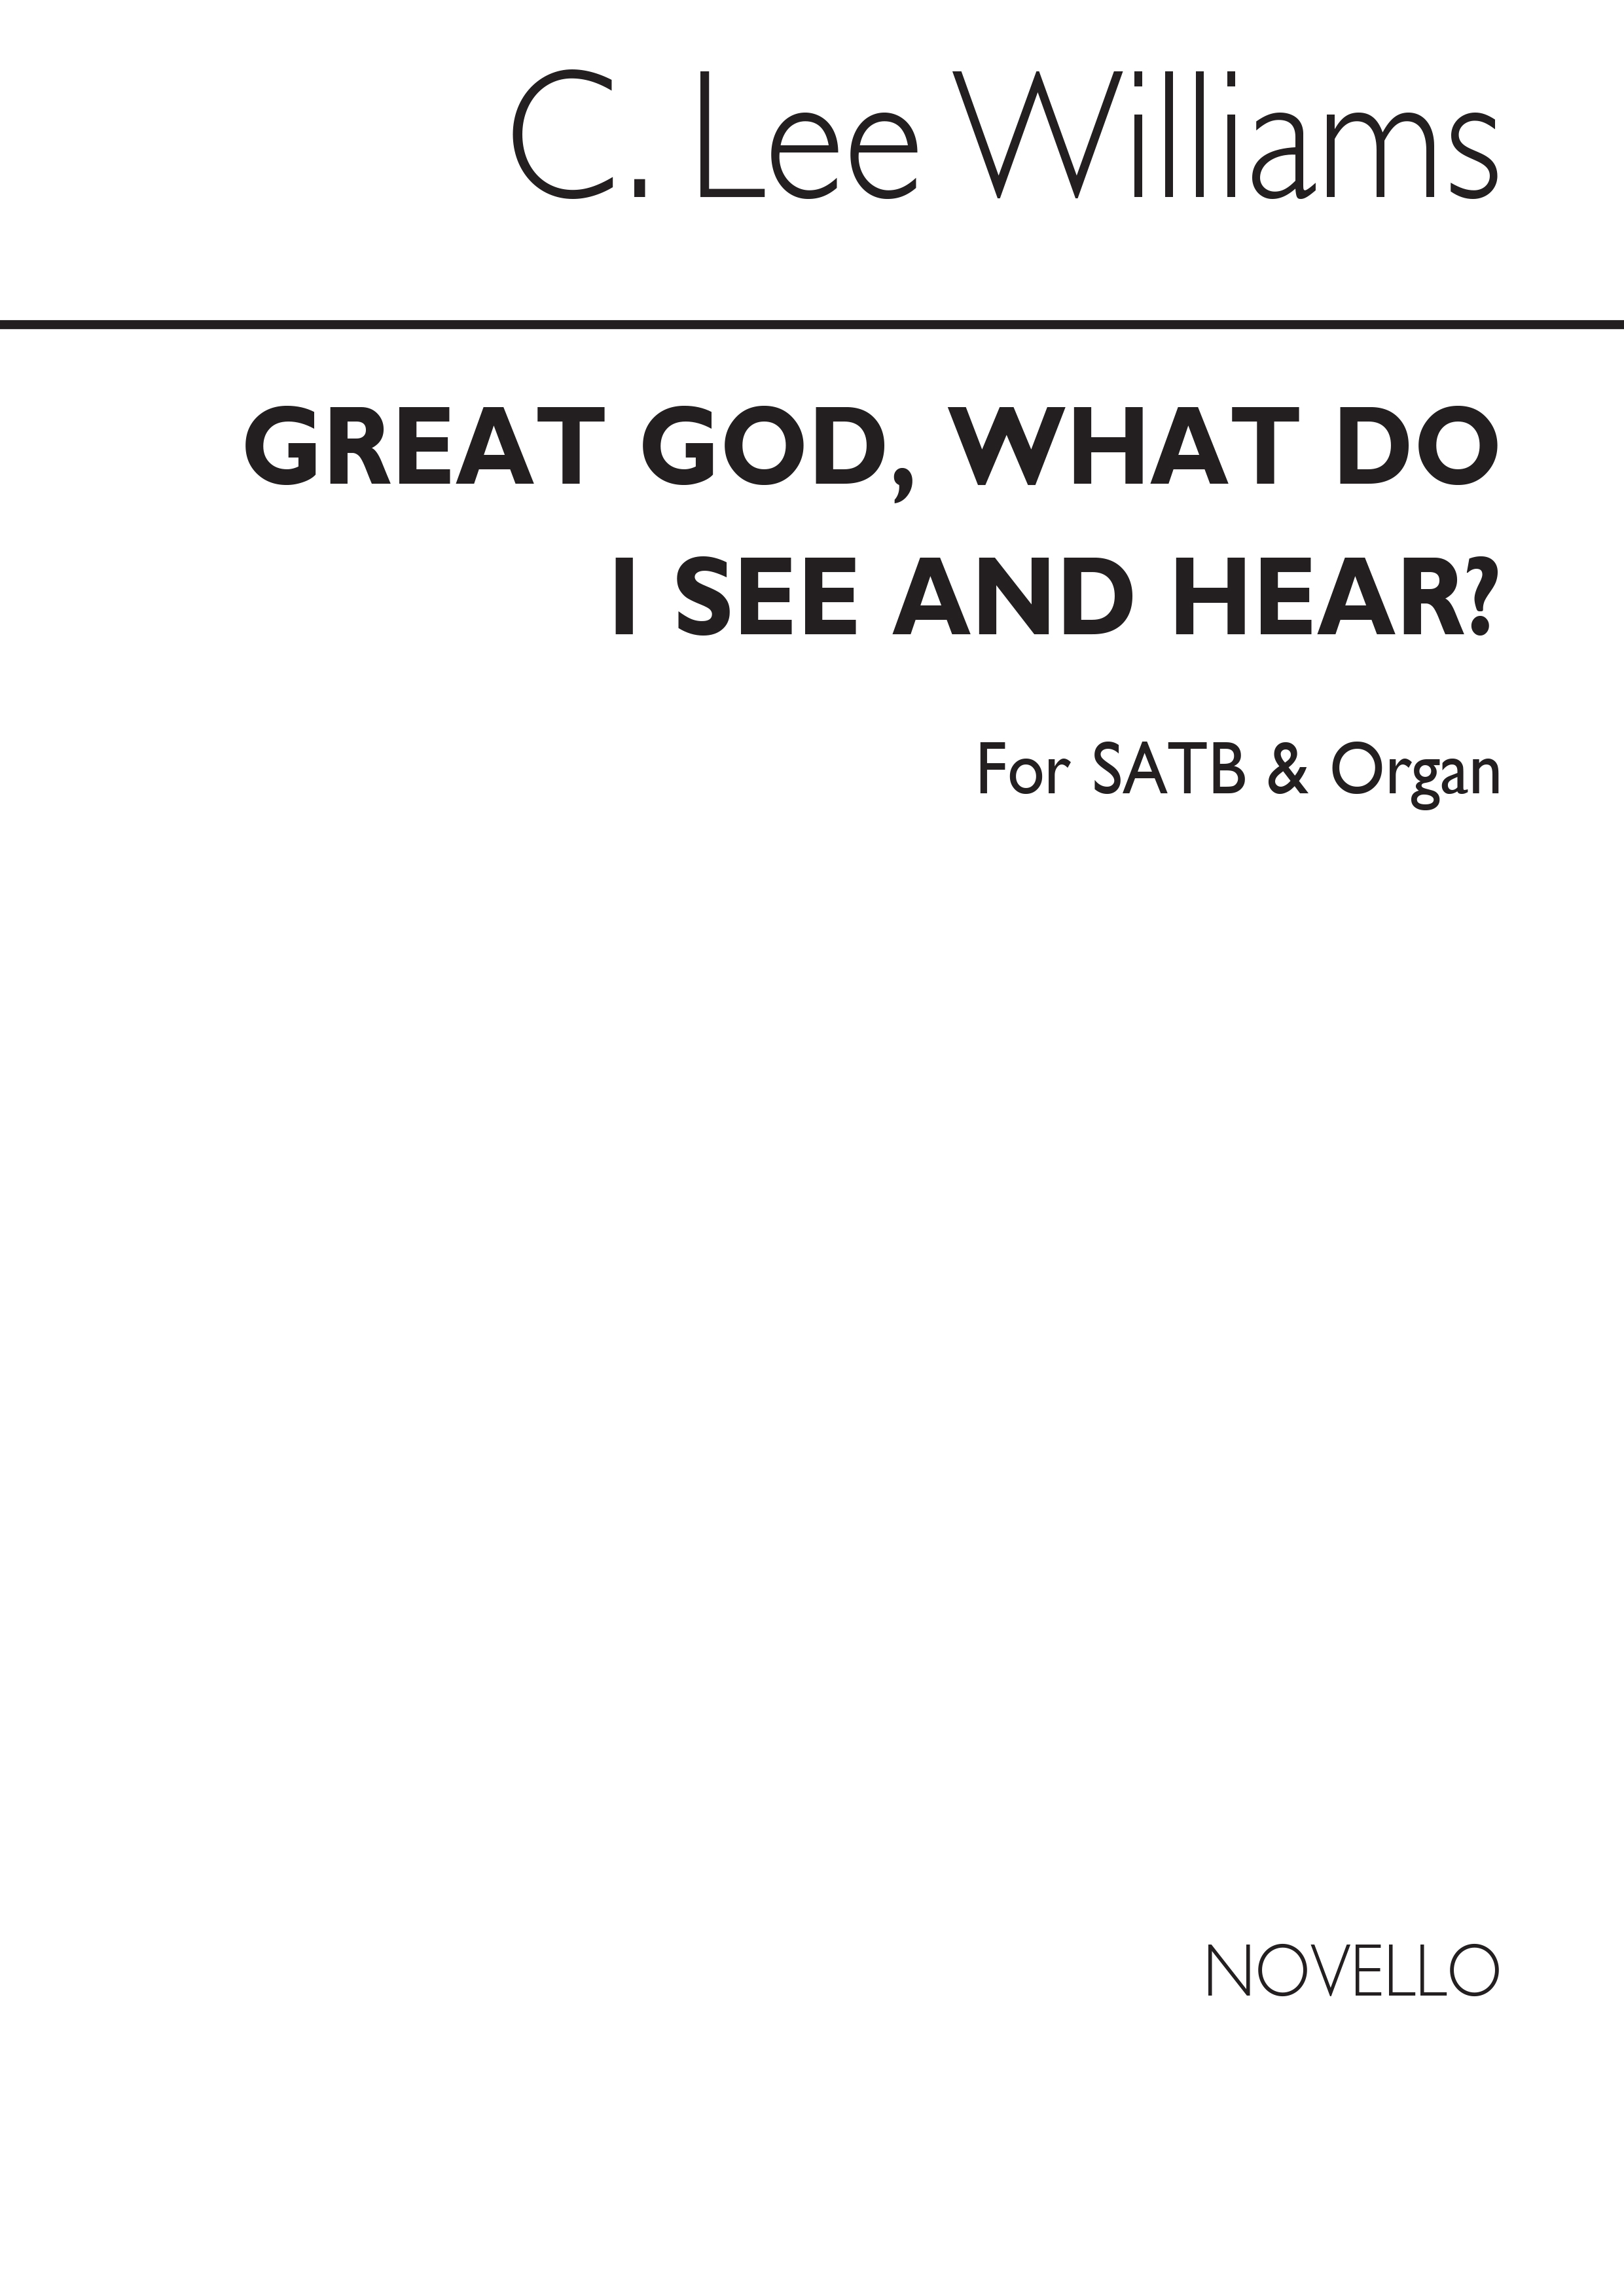 Lee Williams: Great God, What Do I See And Hear? SATB/Organ